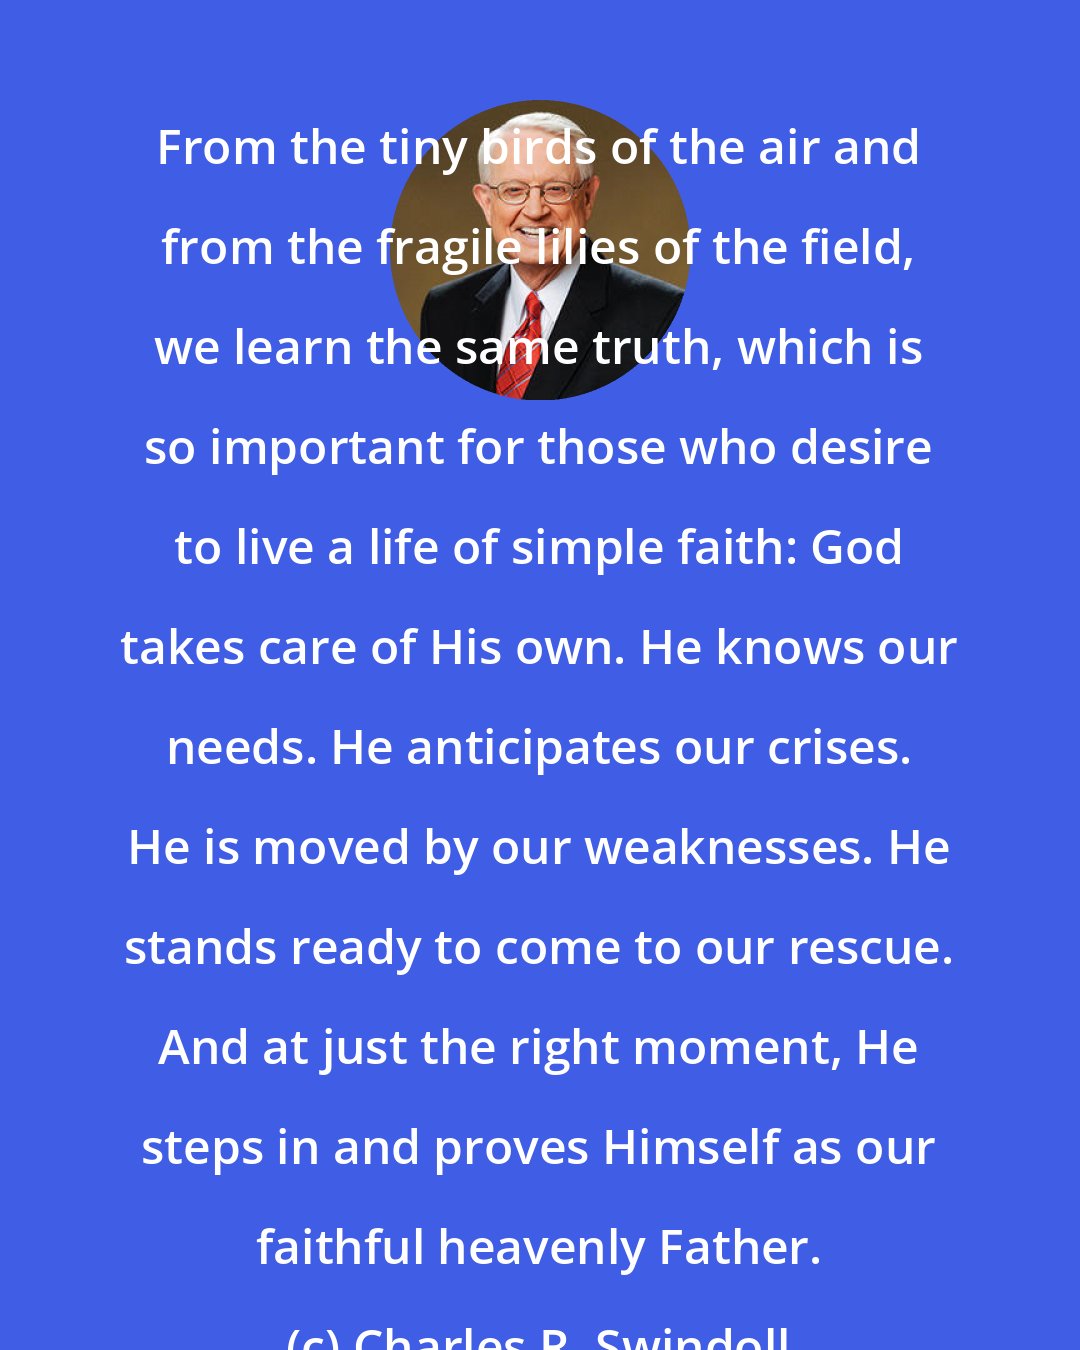 Charles R. Swindoll: From the tiny birds of the air and from the fragile lilies of the field, we learn the same truth, which is so important for those who desire to live a life of simple faith: God takes care of His own. He knows our needs. He anticipates our crises. He is moved by our weaknesses. He stands ready to come to our rescue. And at just the right moment, He steps in and proves Himself as our faithful heavenly Father.